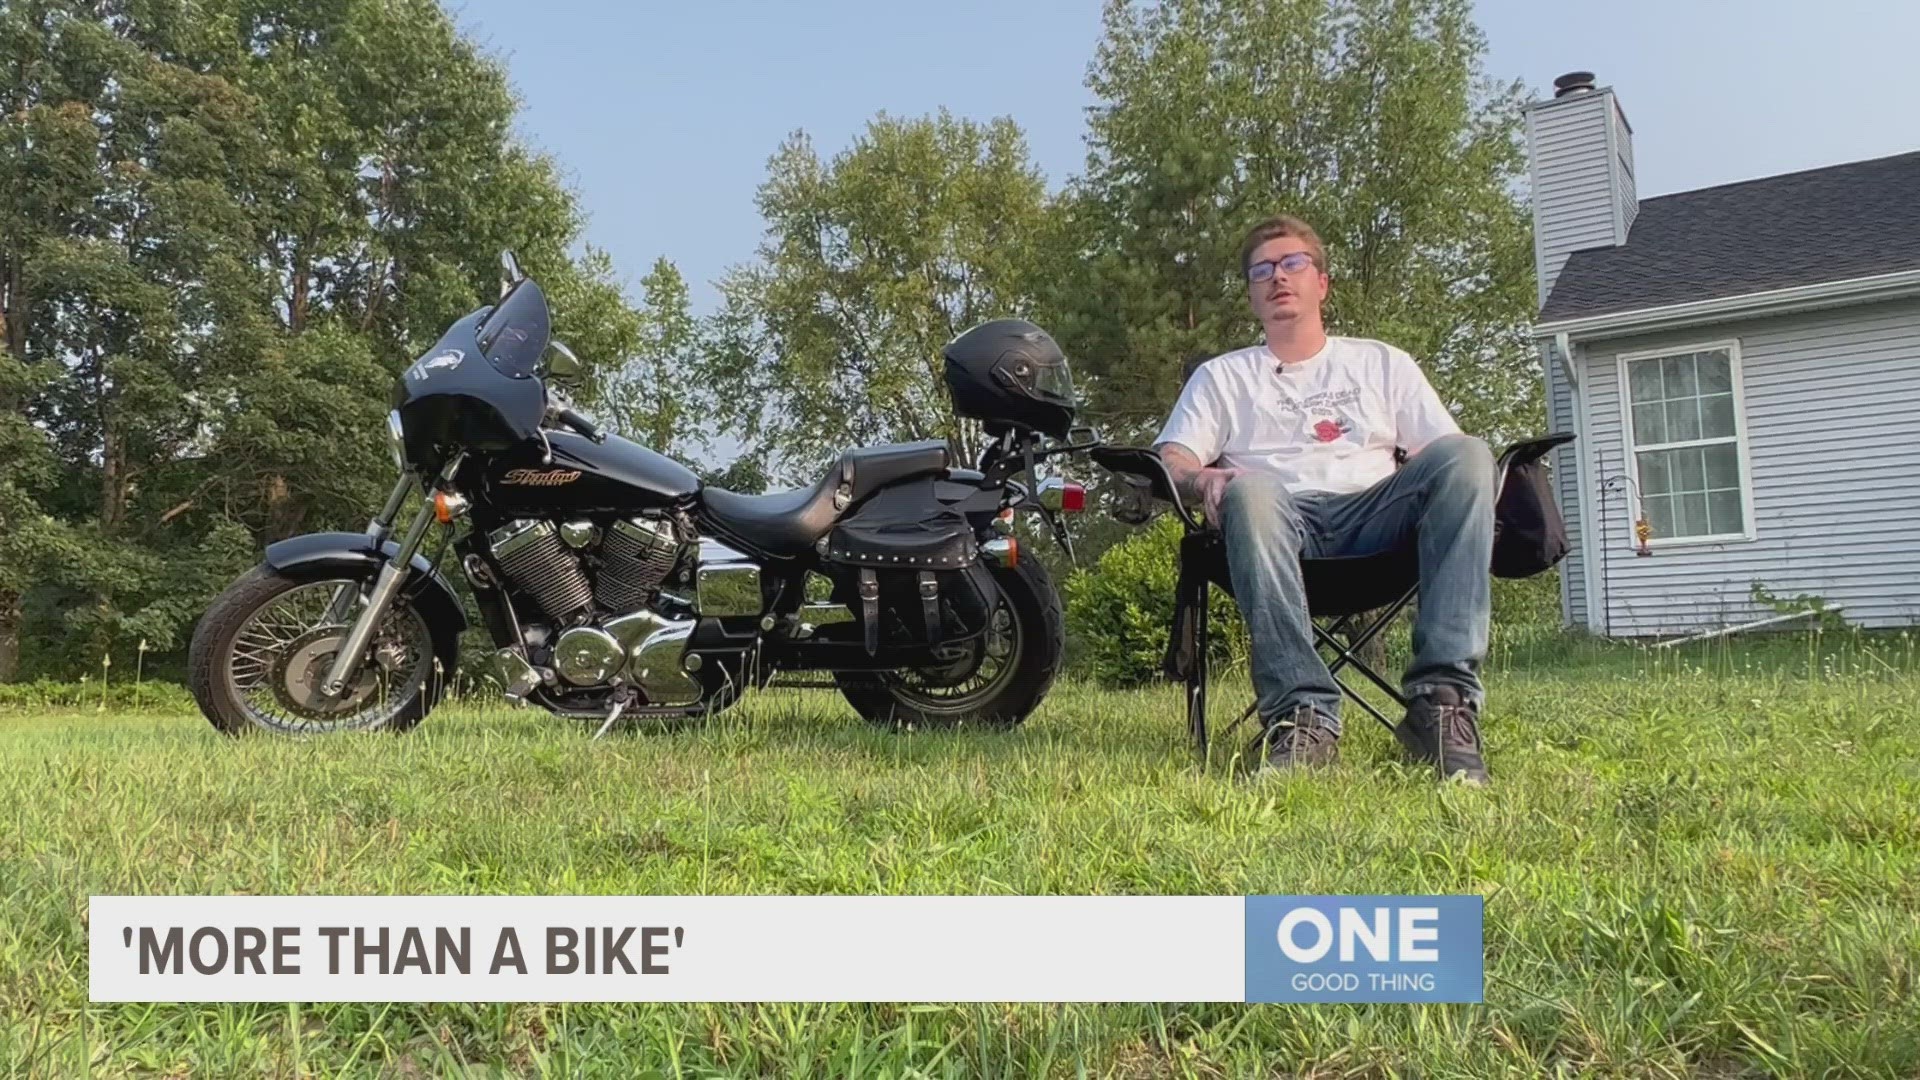 Noah Davy was determined to find a black Honda Shadow Spirit that used to belong to his late brother Shane, and he was able to find it after asking for help.